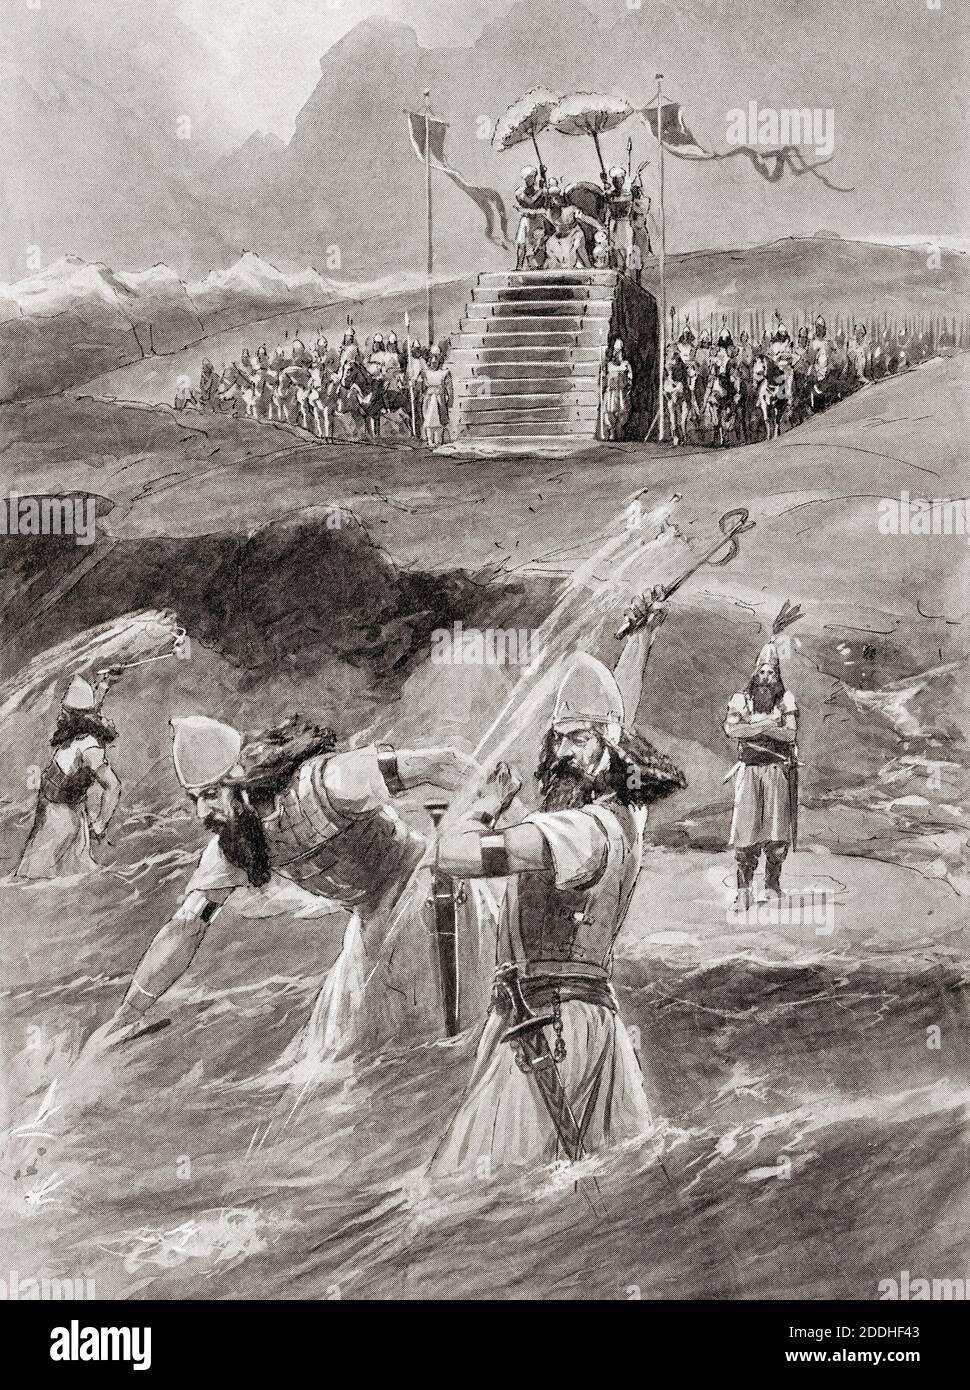 Xerxes has the sea scourged.  Herodotus reported that the incident happened on the Hellespont when a storm destroyed his pontoon bridges frustrating the king of the Archaemenid Empire’s first attempt to pass his army over the straits and invade Greece.  Herodotus says the King’s second attempt wass successful.  After a work by John Steeple Davis. Stock Photo